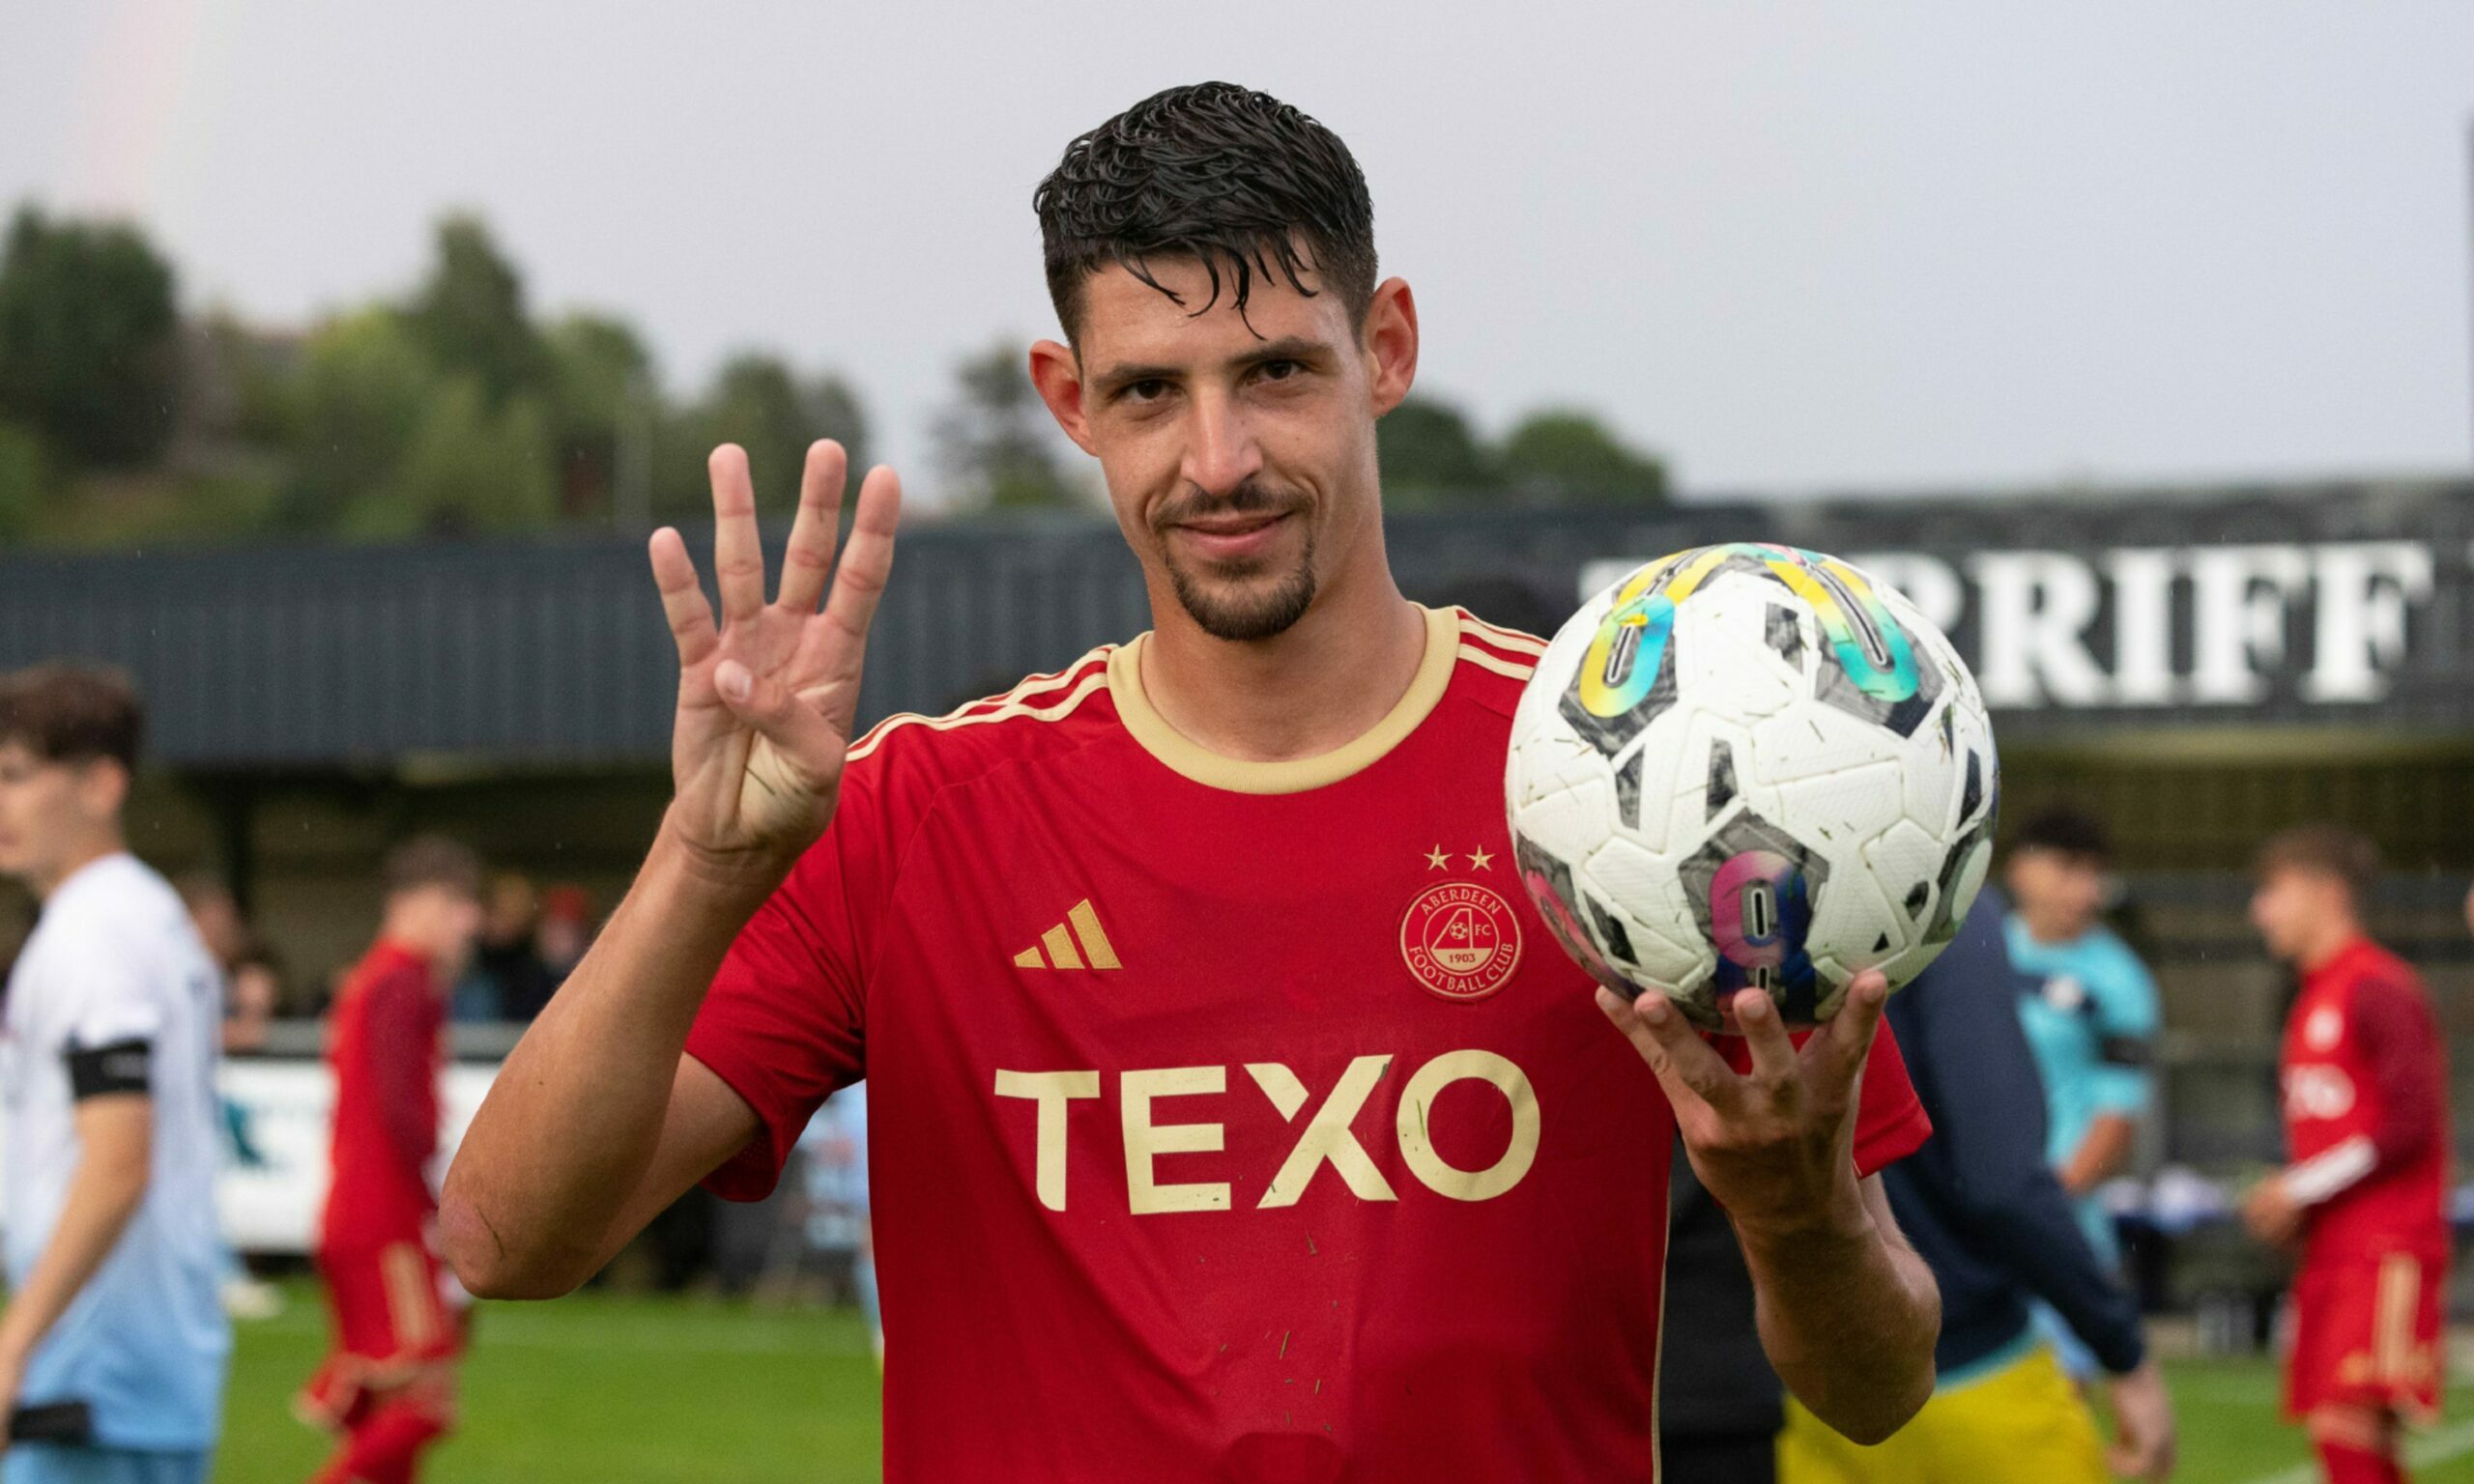 Aberdeen's Ester Sokler holding a football in one hand and holding up four fingers with the other